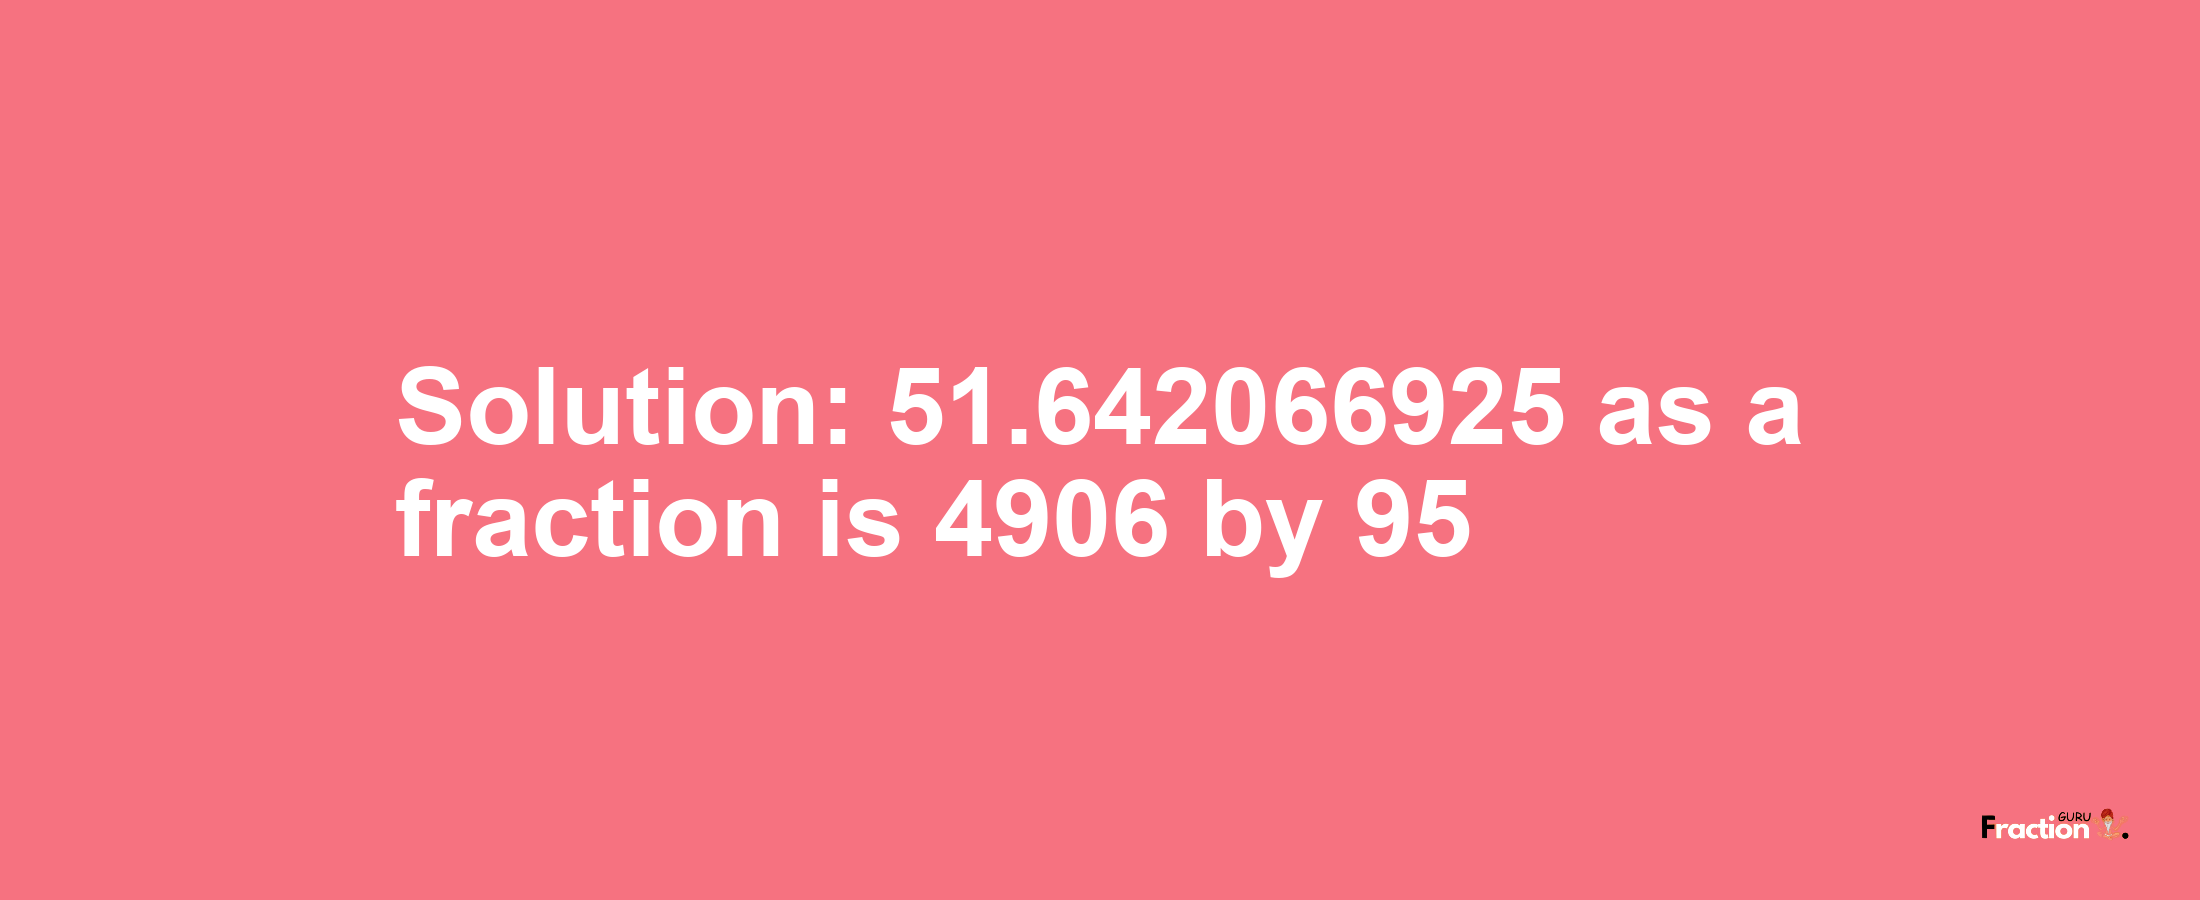 Solution:51.642066925 as a fraction is 4906/95